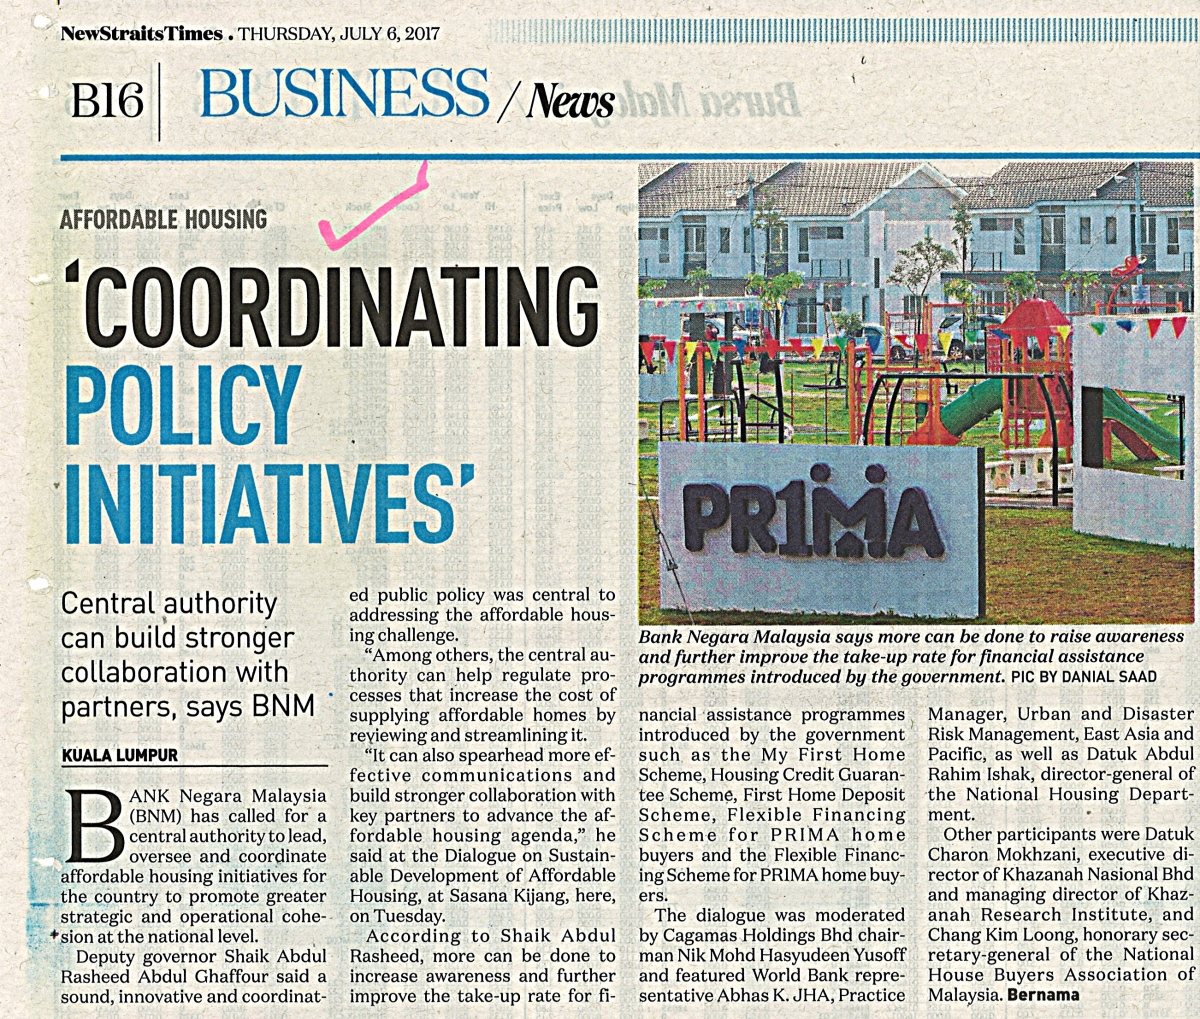 Coordinating Policy Initiatives